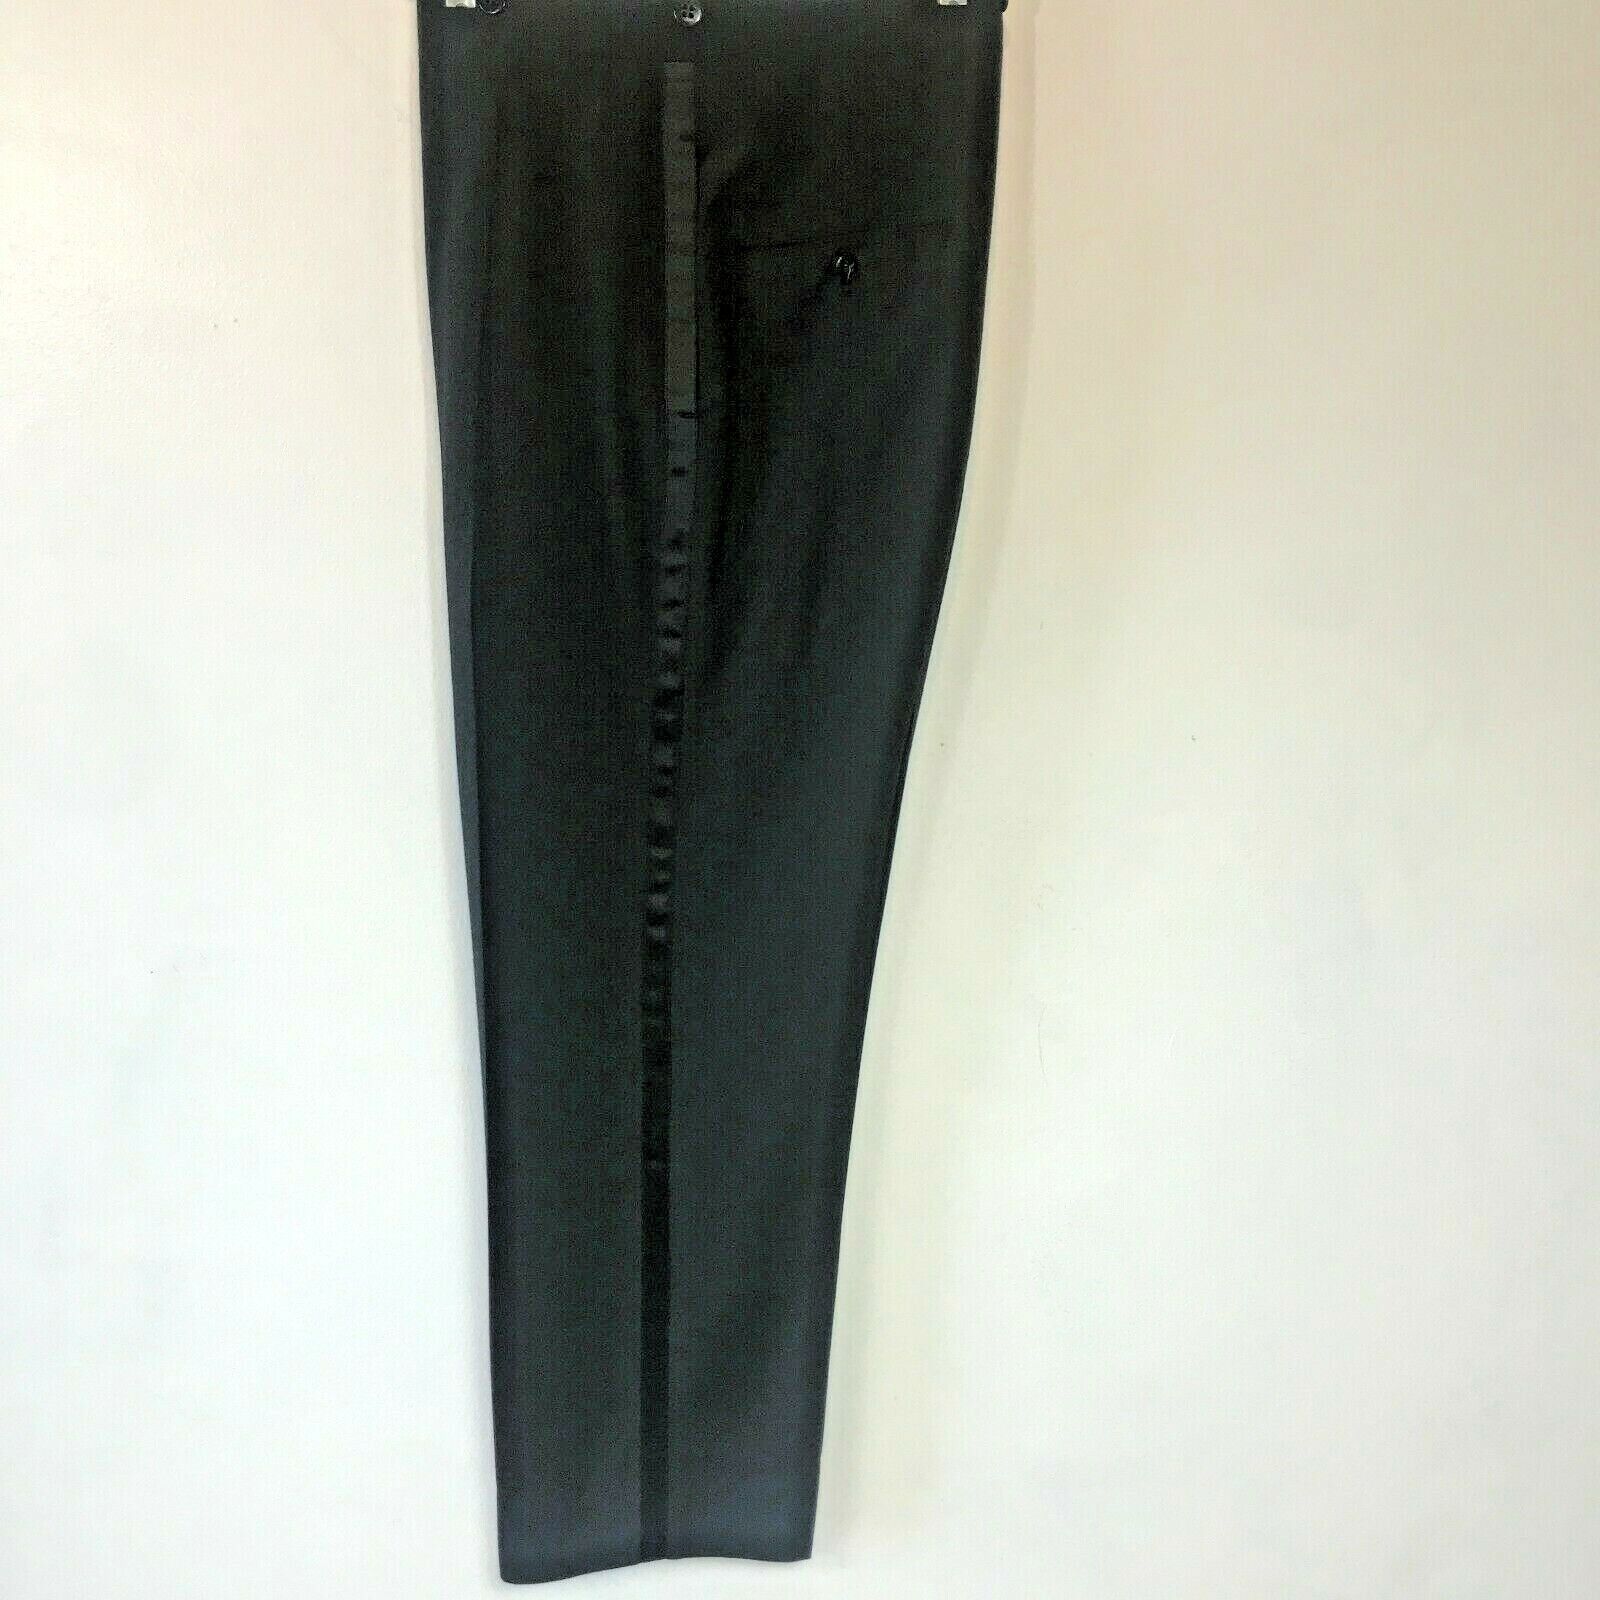 Vintage After Six Rudofker Tuxedo size 44? and similar items